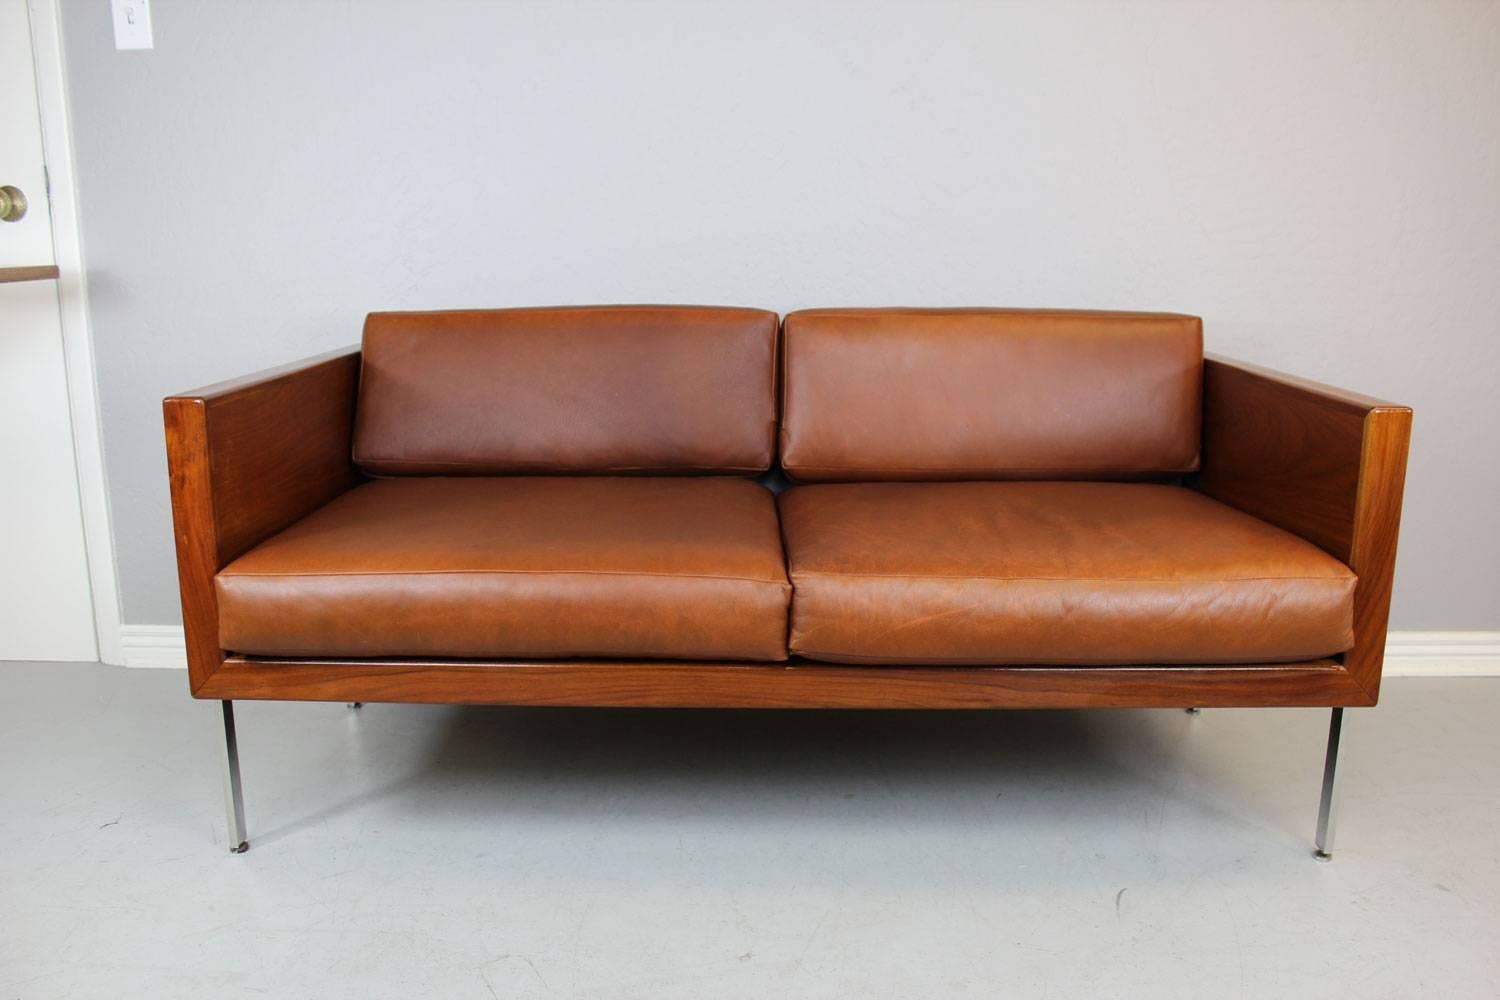 Architectural series sofa in walnut, stainless steel and leather by Harvey Probber. Professionally restored, however, the original leather remains as it is in very good condition with a nice overall patina. This unit has new bottom webbing. See